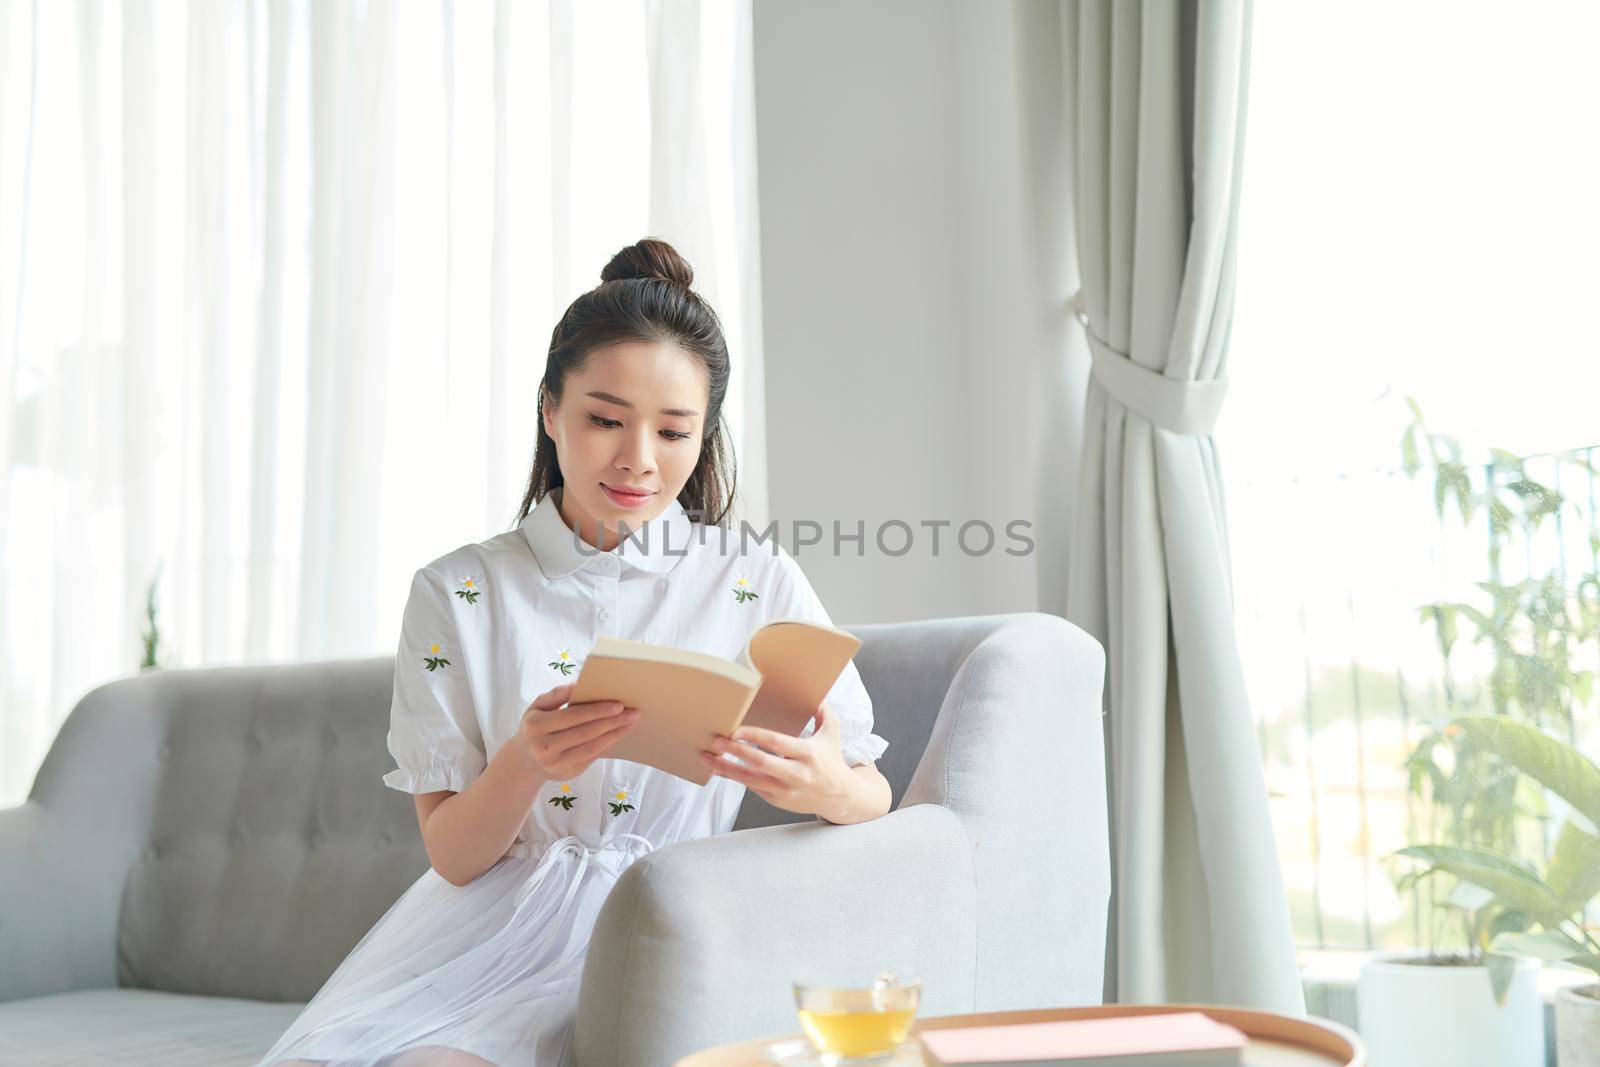 Girl reading an interesting book and smiling by makidotvn